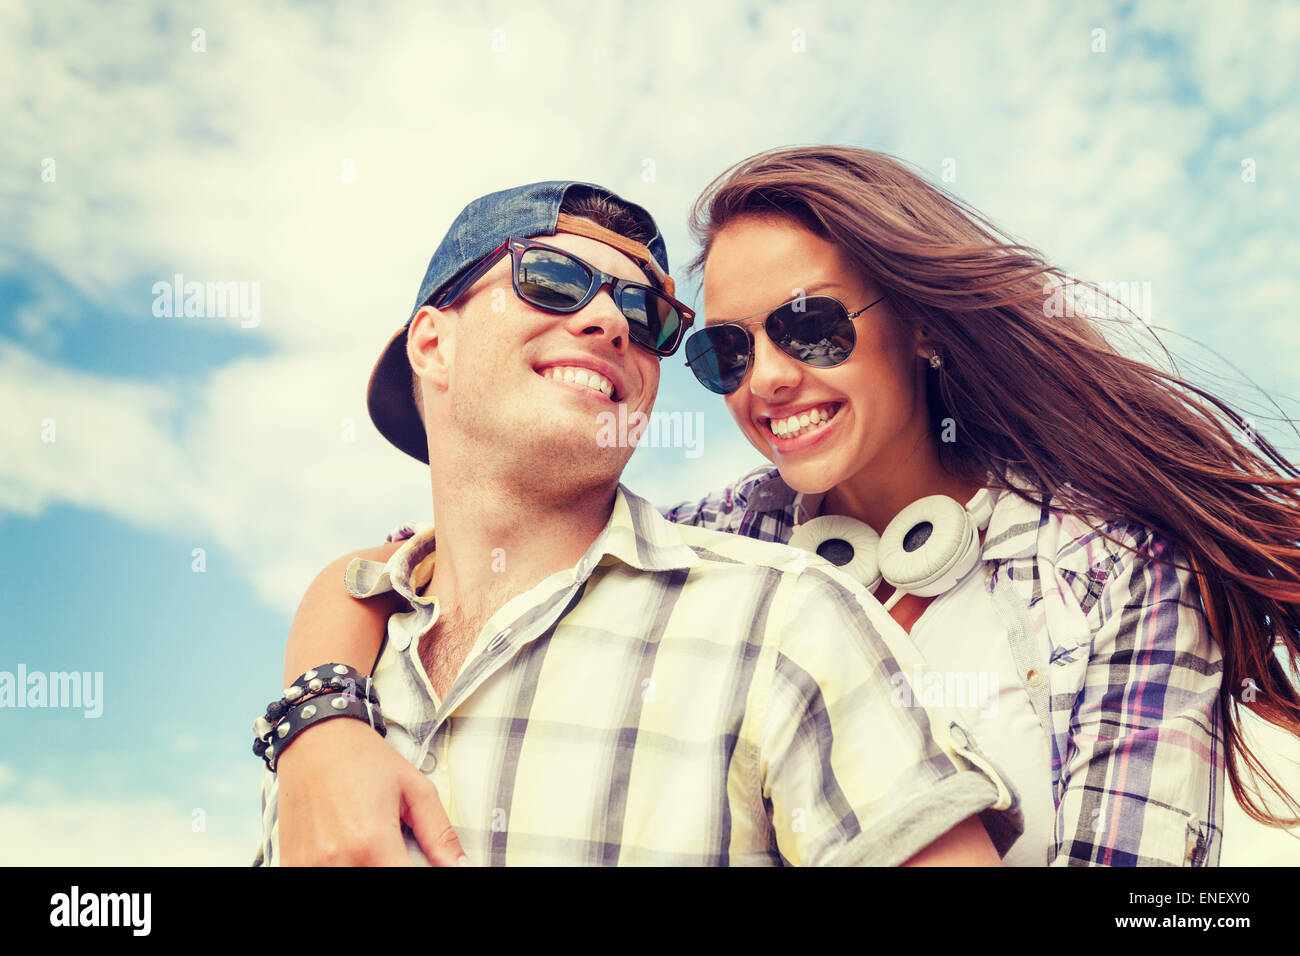 smiling teenagers in sunglasses having fun outside Stock Photo